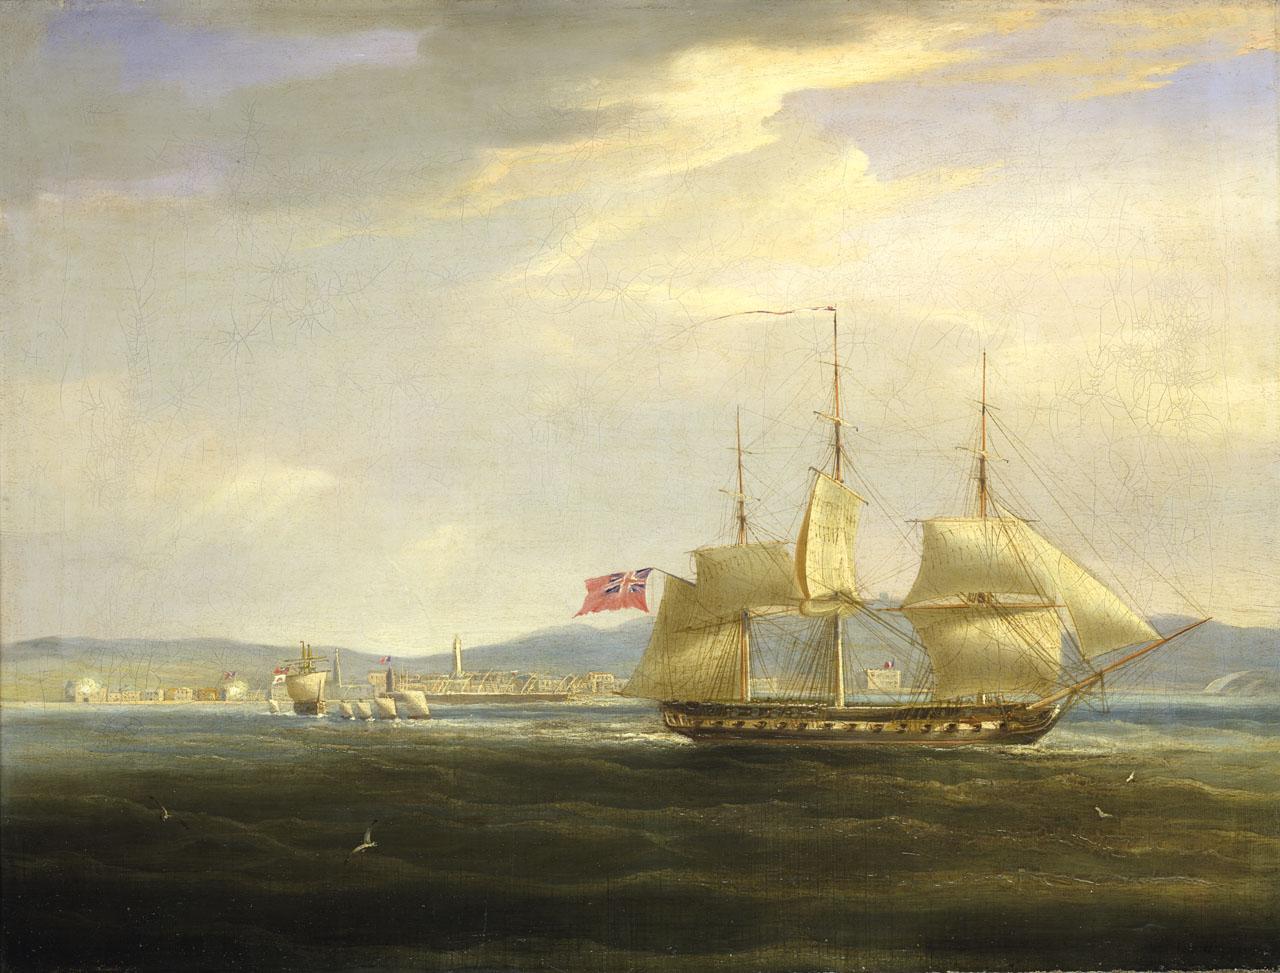 An image showing 'William John Huggins 'HMS 'Mercury' cuts out the French gunboat Leda from Rovigno, 1 April 1809' (RMG reference: BHC0589)'